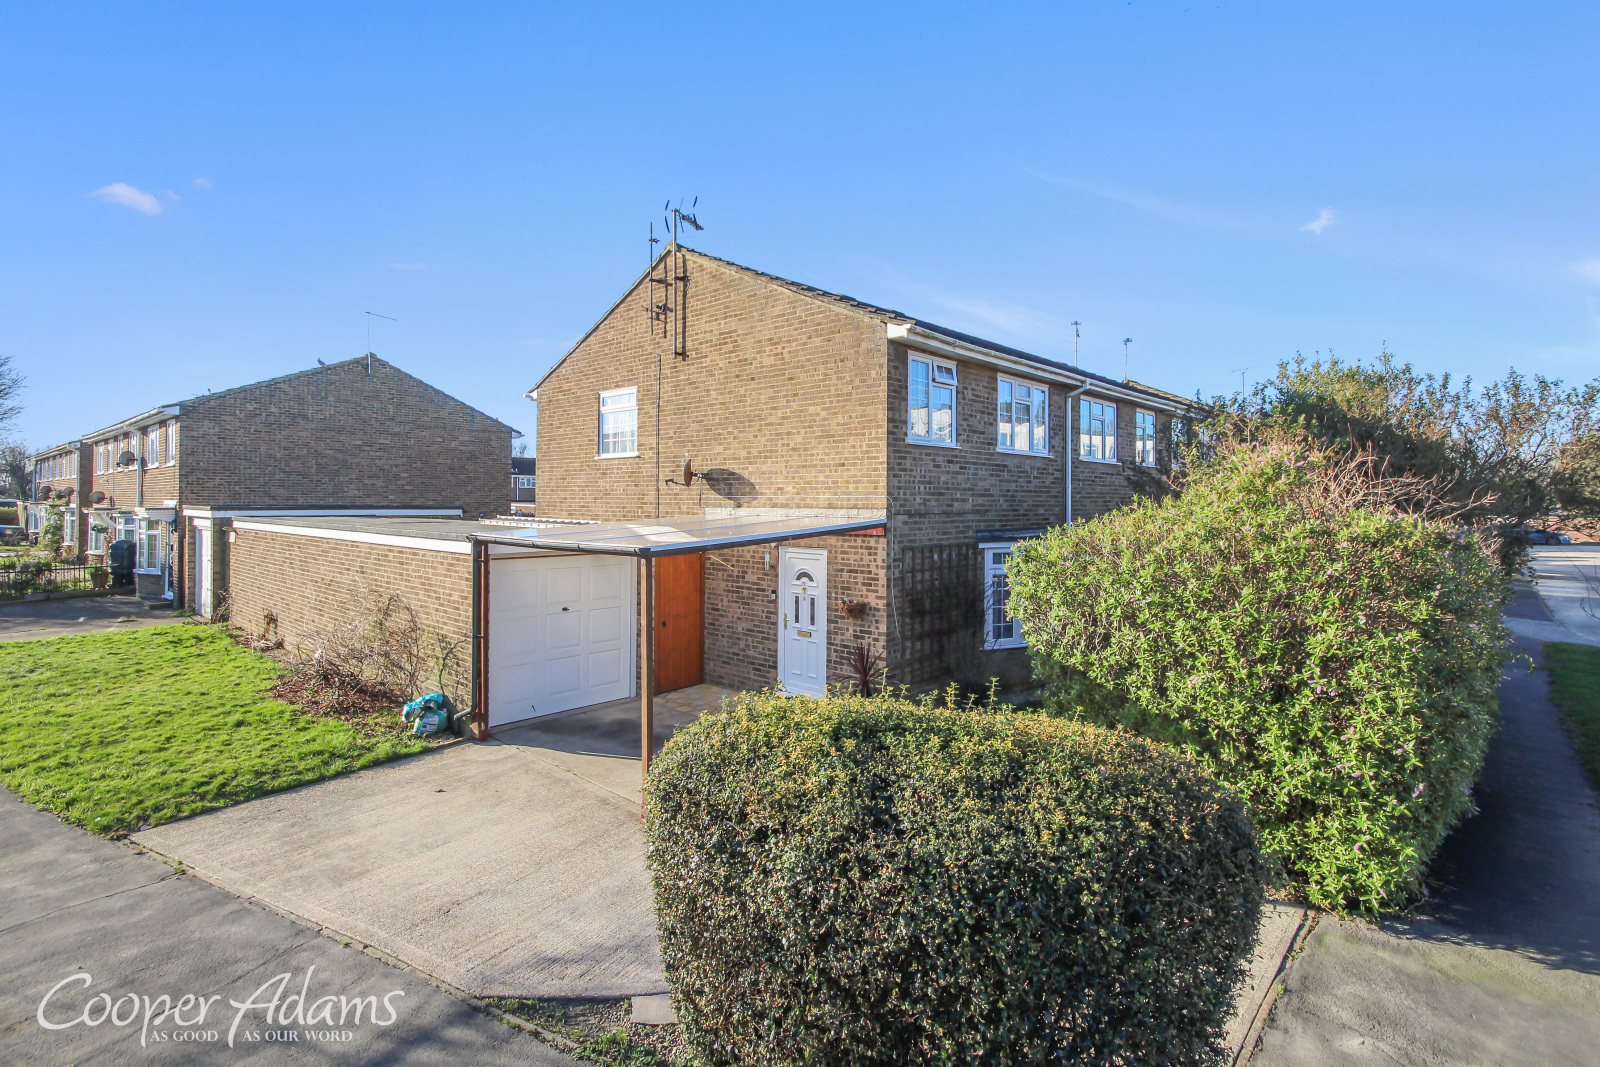 3 bed house for sale in Timberleys, Littlehampton - Property Image 1